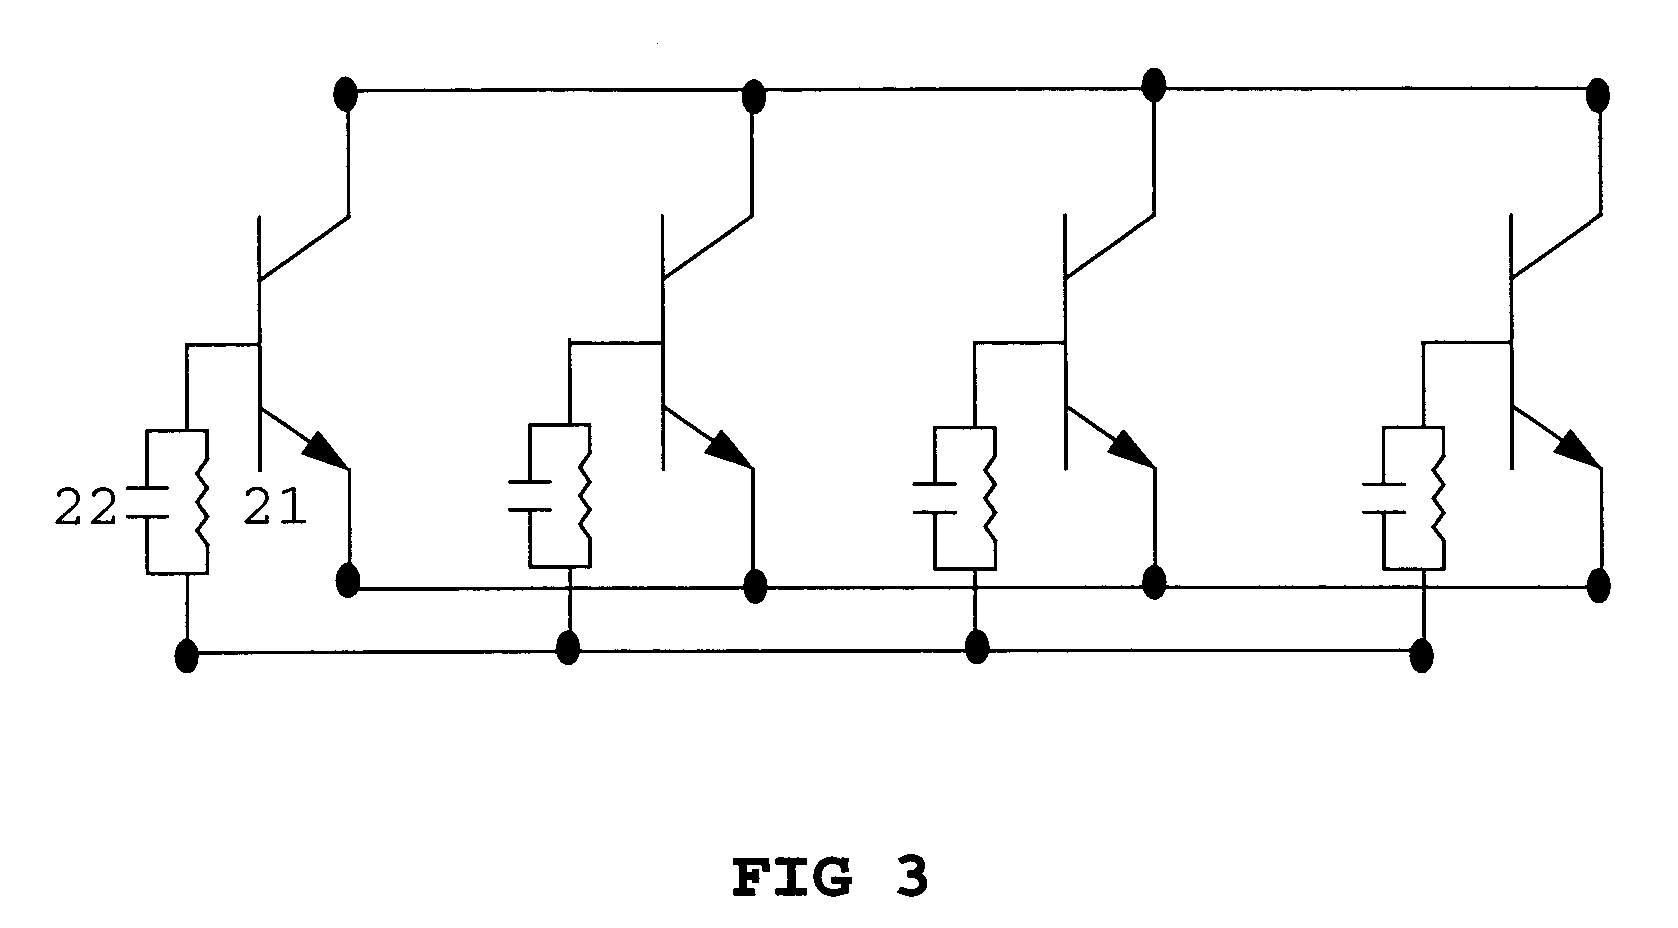 Combined high reliability contact metal/ ballast resistor/ bypass capacitor structure for power transistors